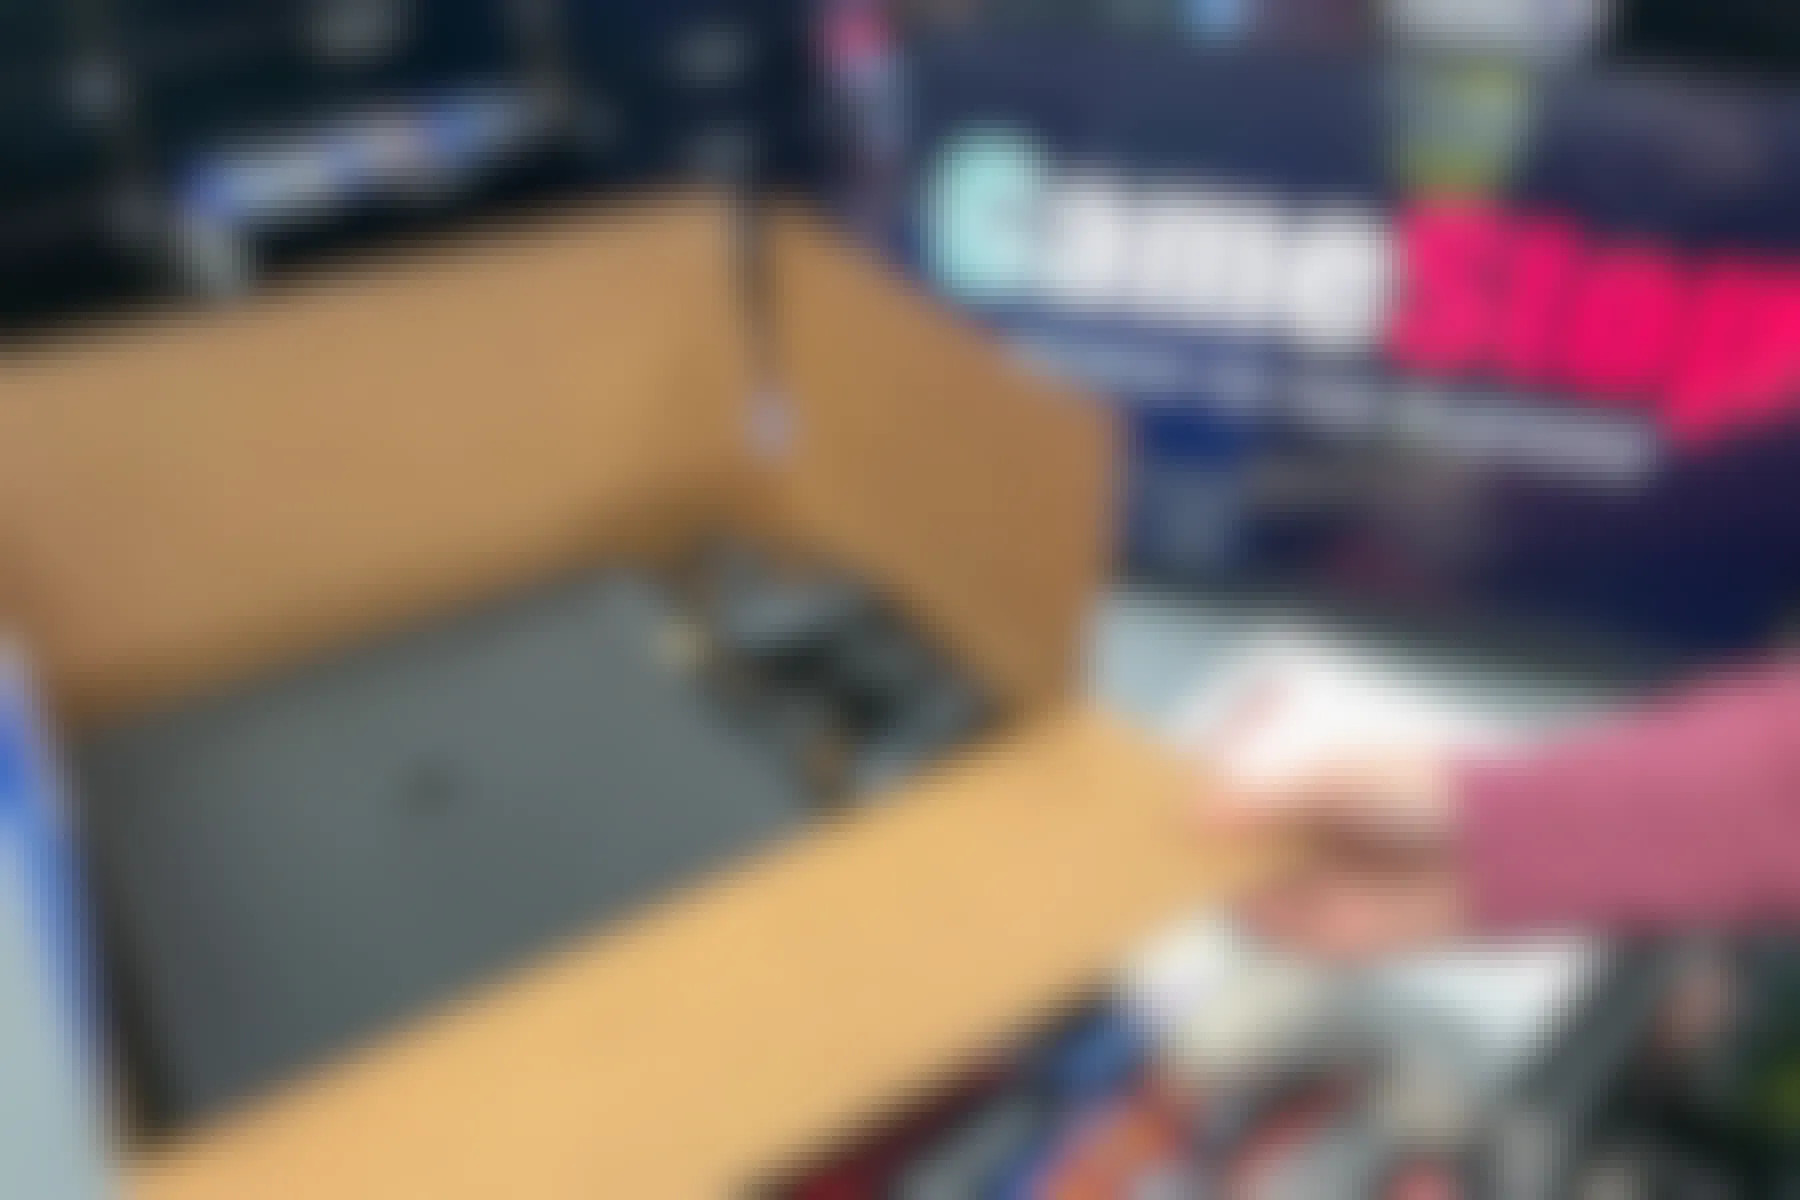 A person holding open a ps4 box sitting on a GameStop counter.